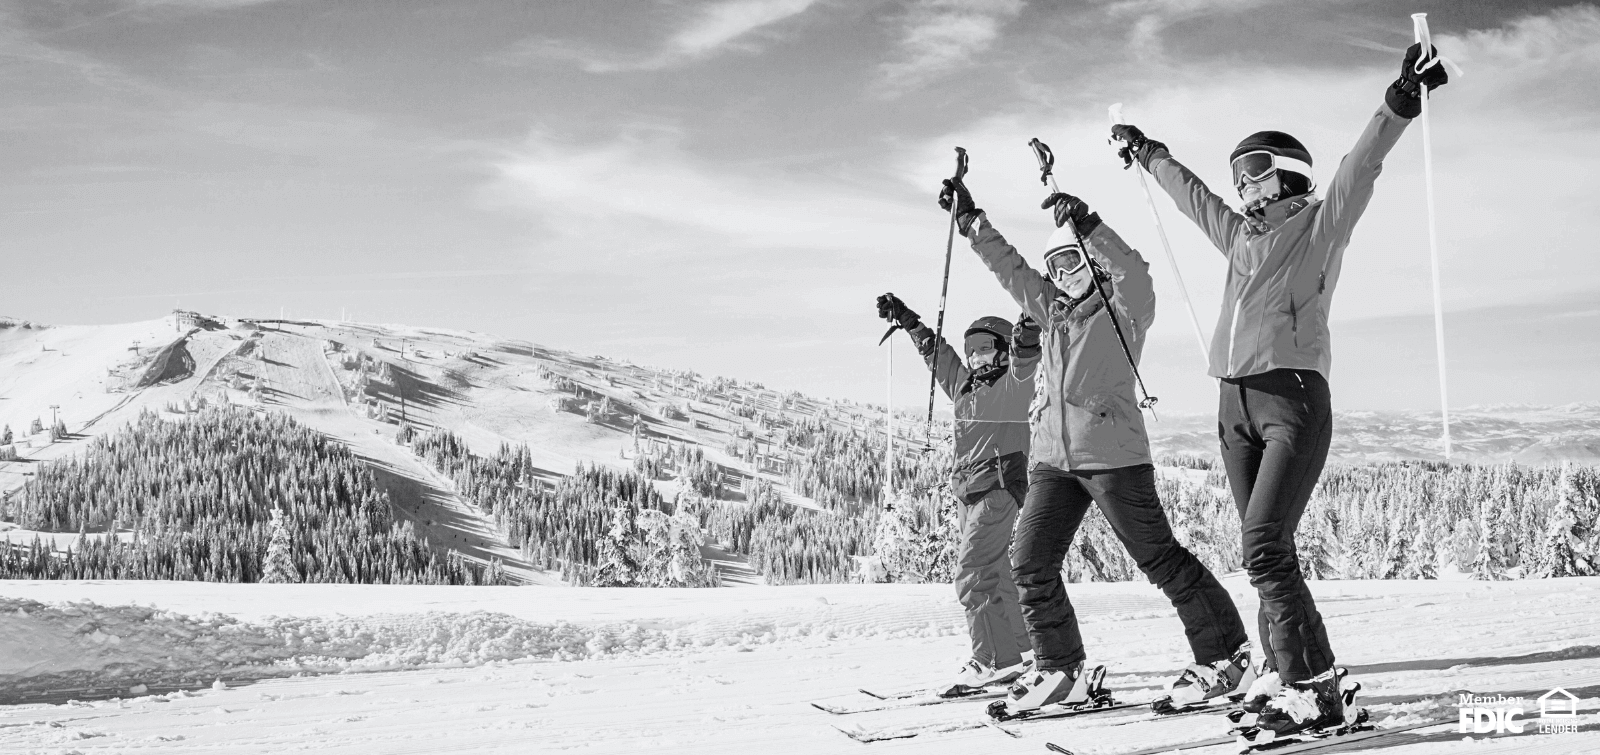 A family celebrates while on a skiing holiday together